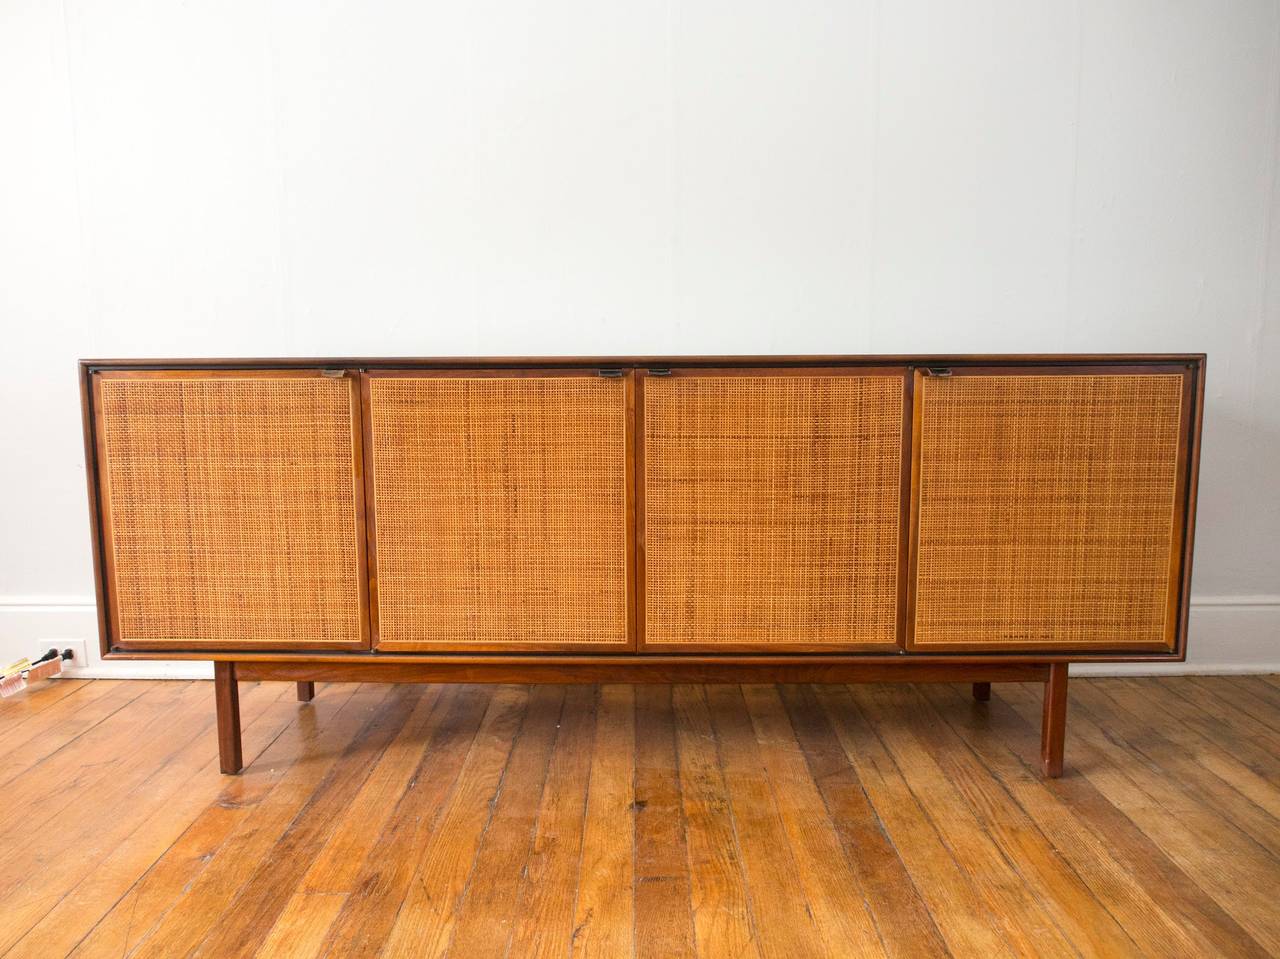 Very nice walnut credenza with lather tab pulls and cane front doors. Doors conceal a pair of shelves and a pair of drawers. 

A second walnut case sits atop the credenza, or could be fitted to float on the wall. Excellent vintage condition. Wear